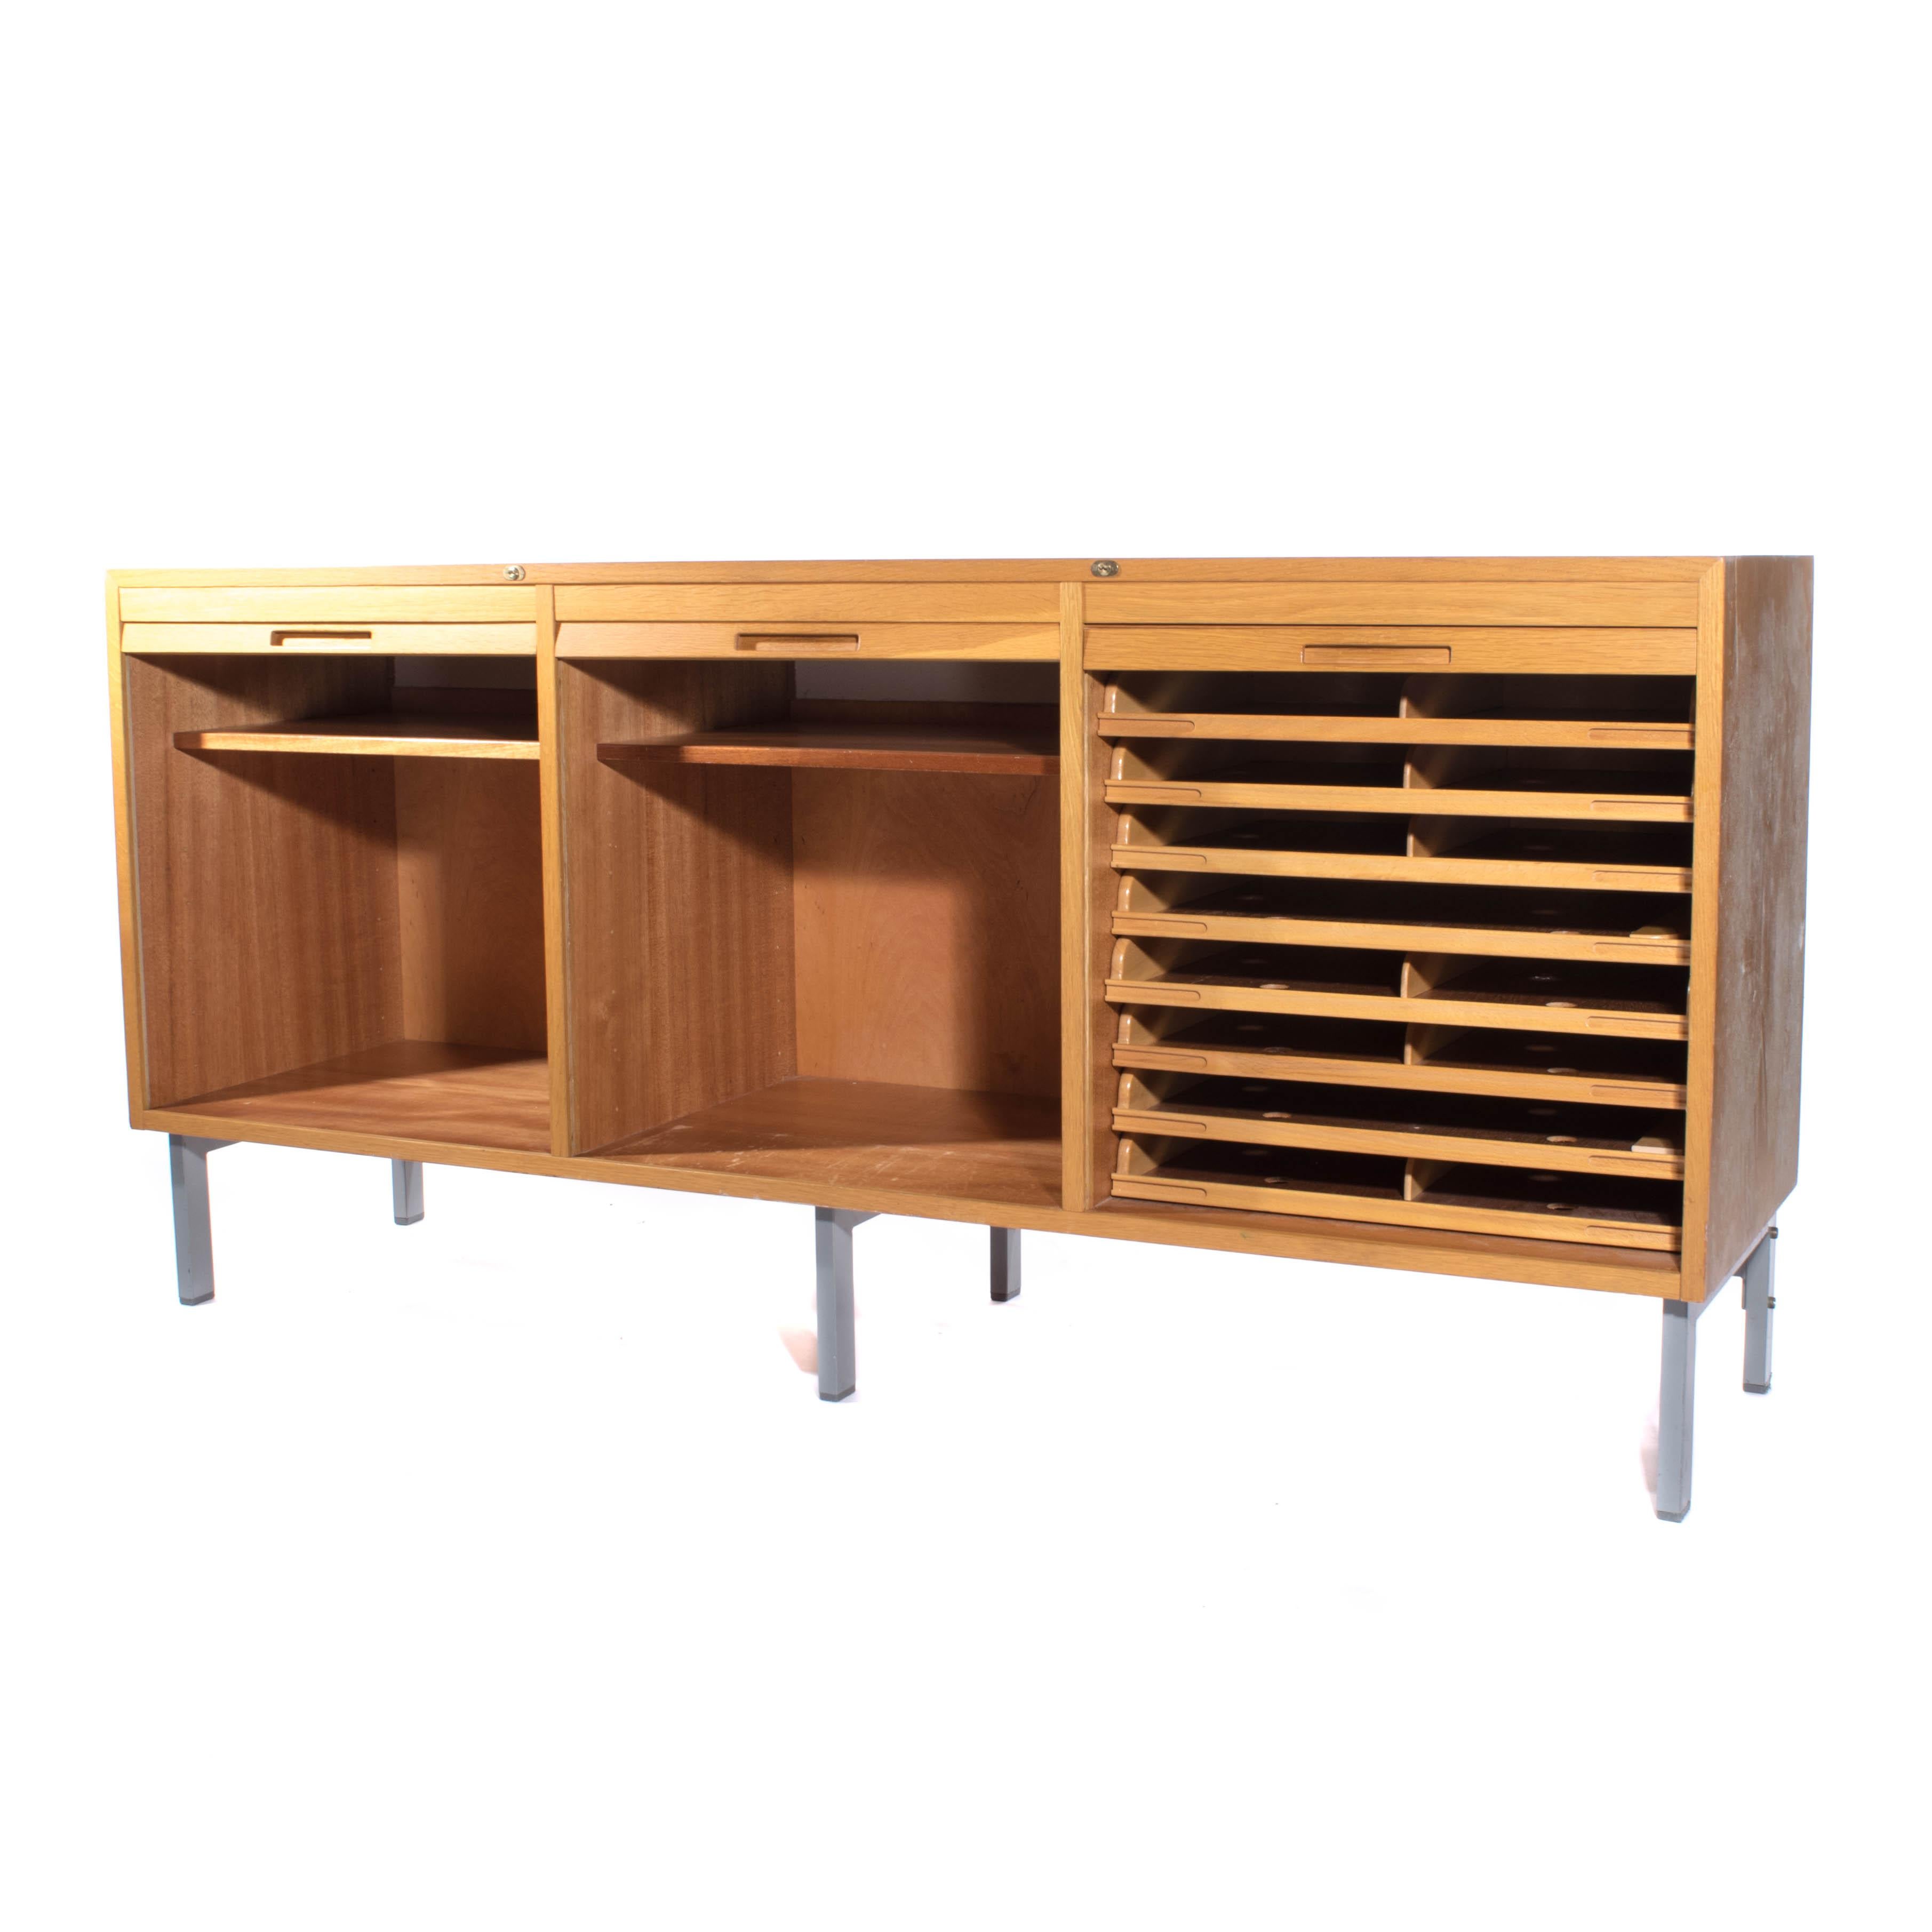 1960s sideboard or credenza made of light oak with rolling doors and metal legs.